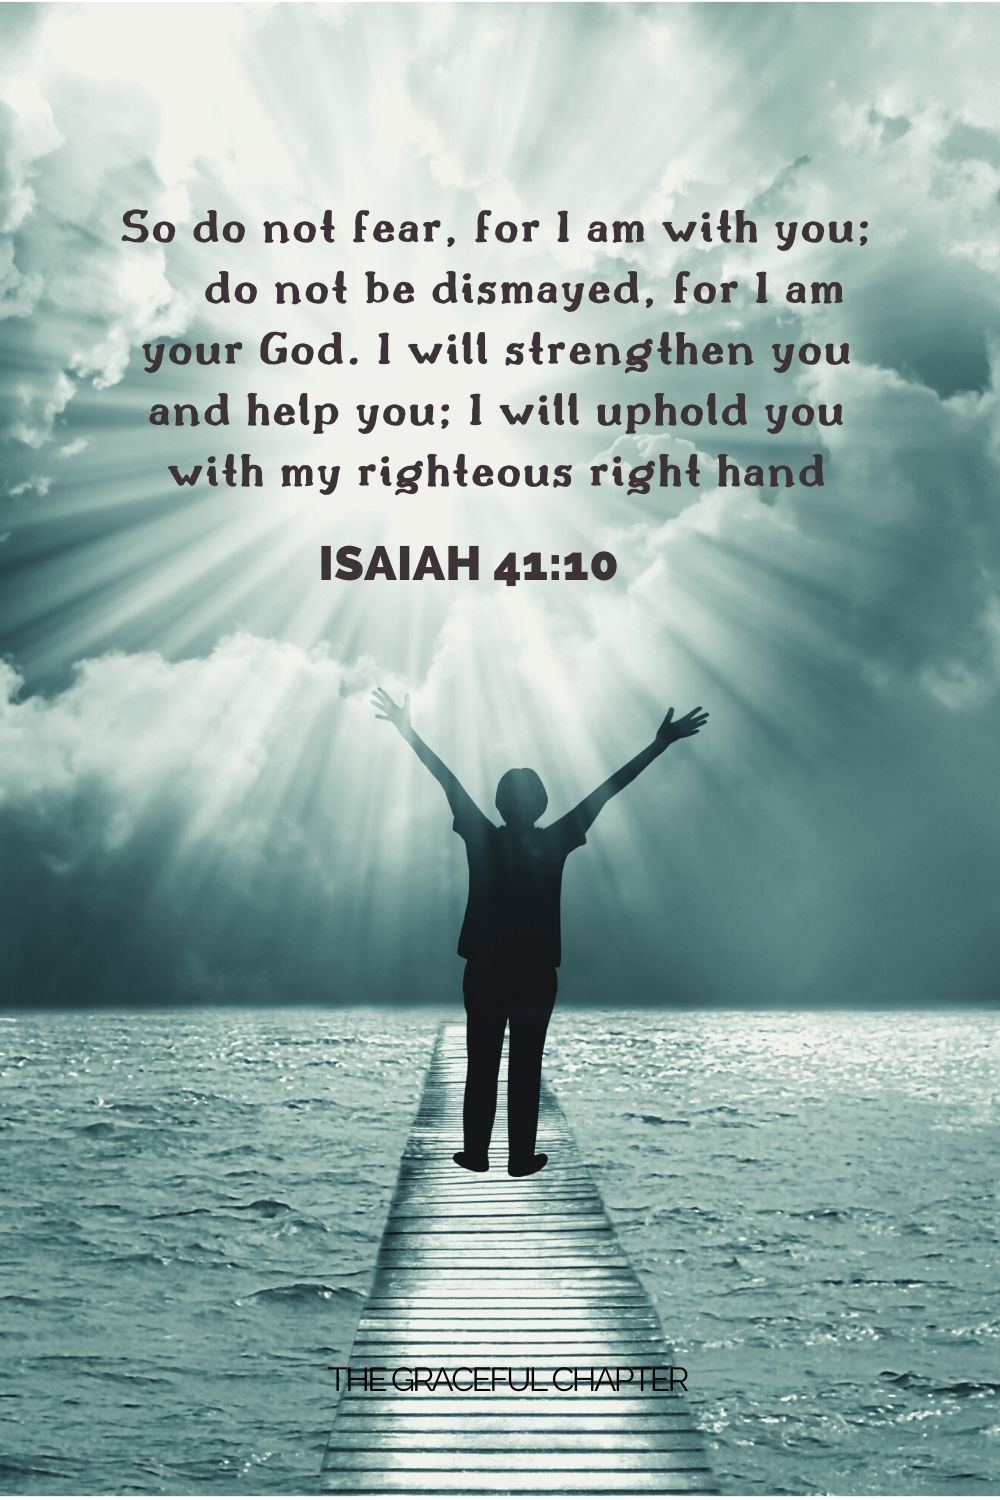 So do not fear, for I am with you; do not be dismayed, for I am your God. I will strengthen you and help you; I will uphold you with my righteous right hand Isaiah 41:10